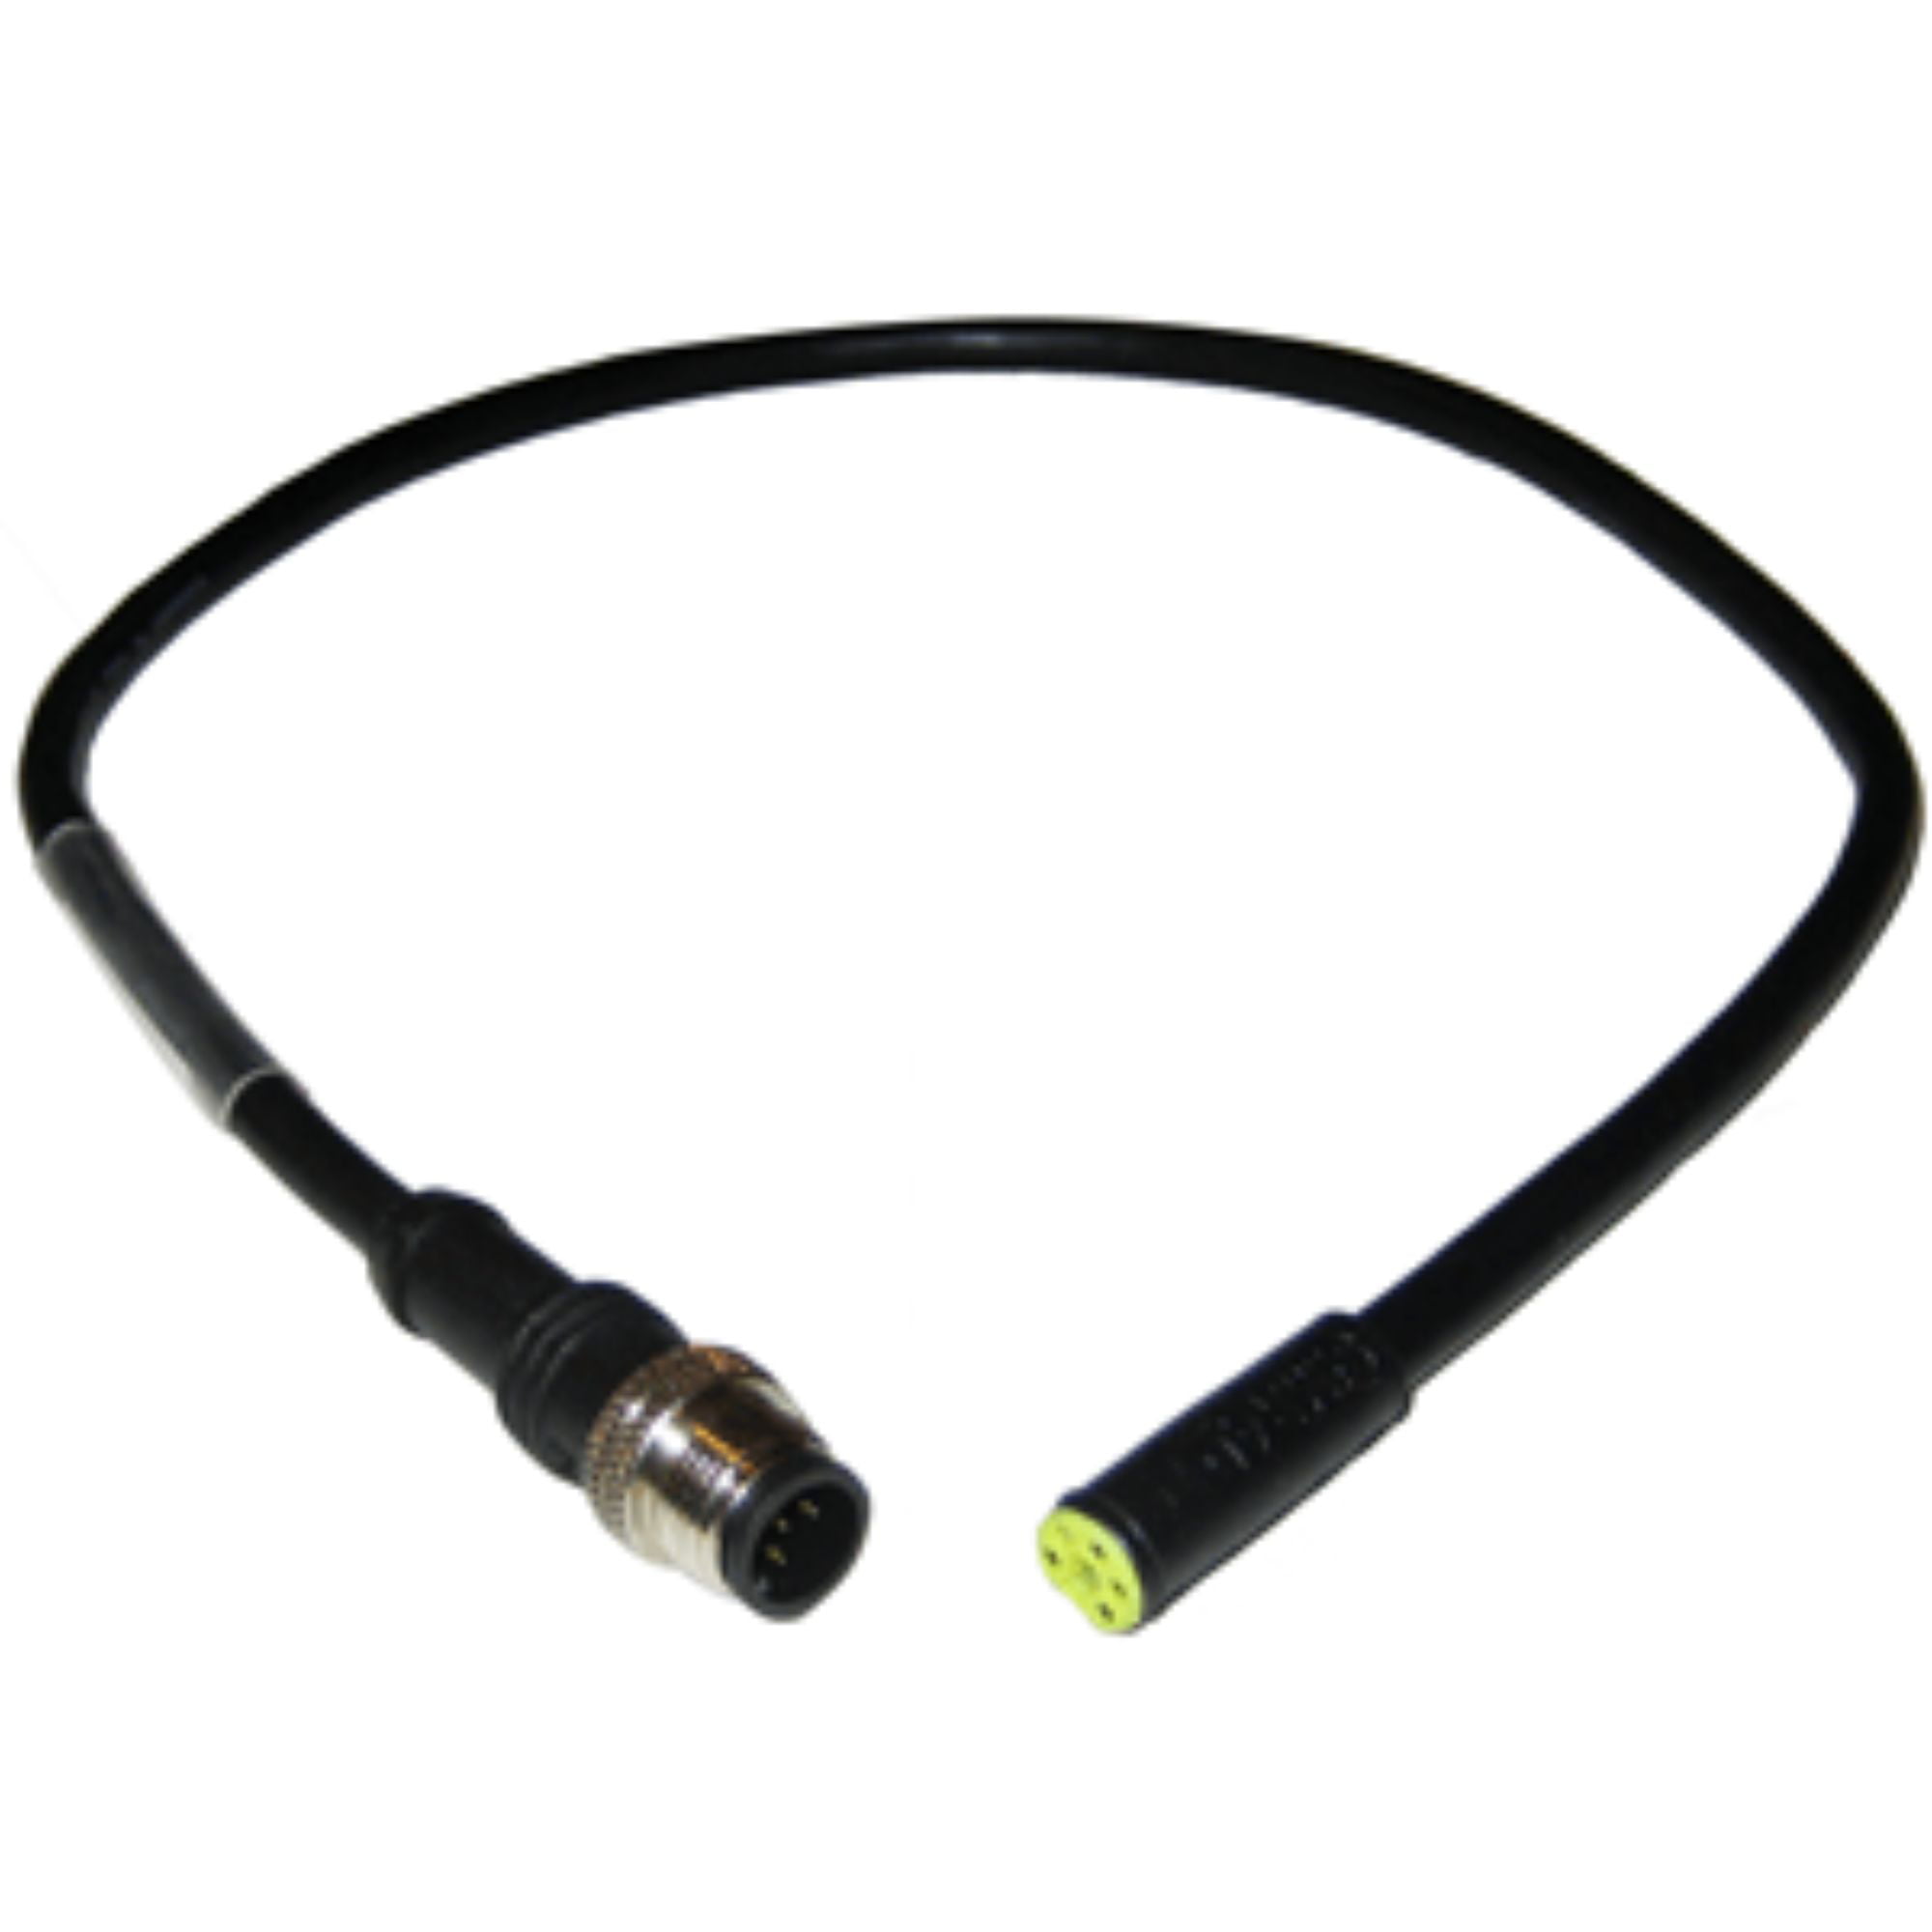 Lowrance Nac-frd2fbl NMEA Network Adapter Cable for sale online 